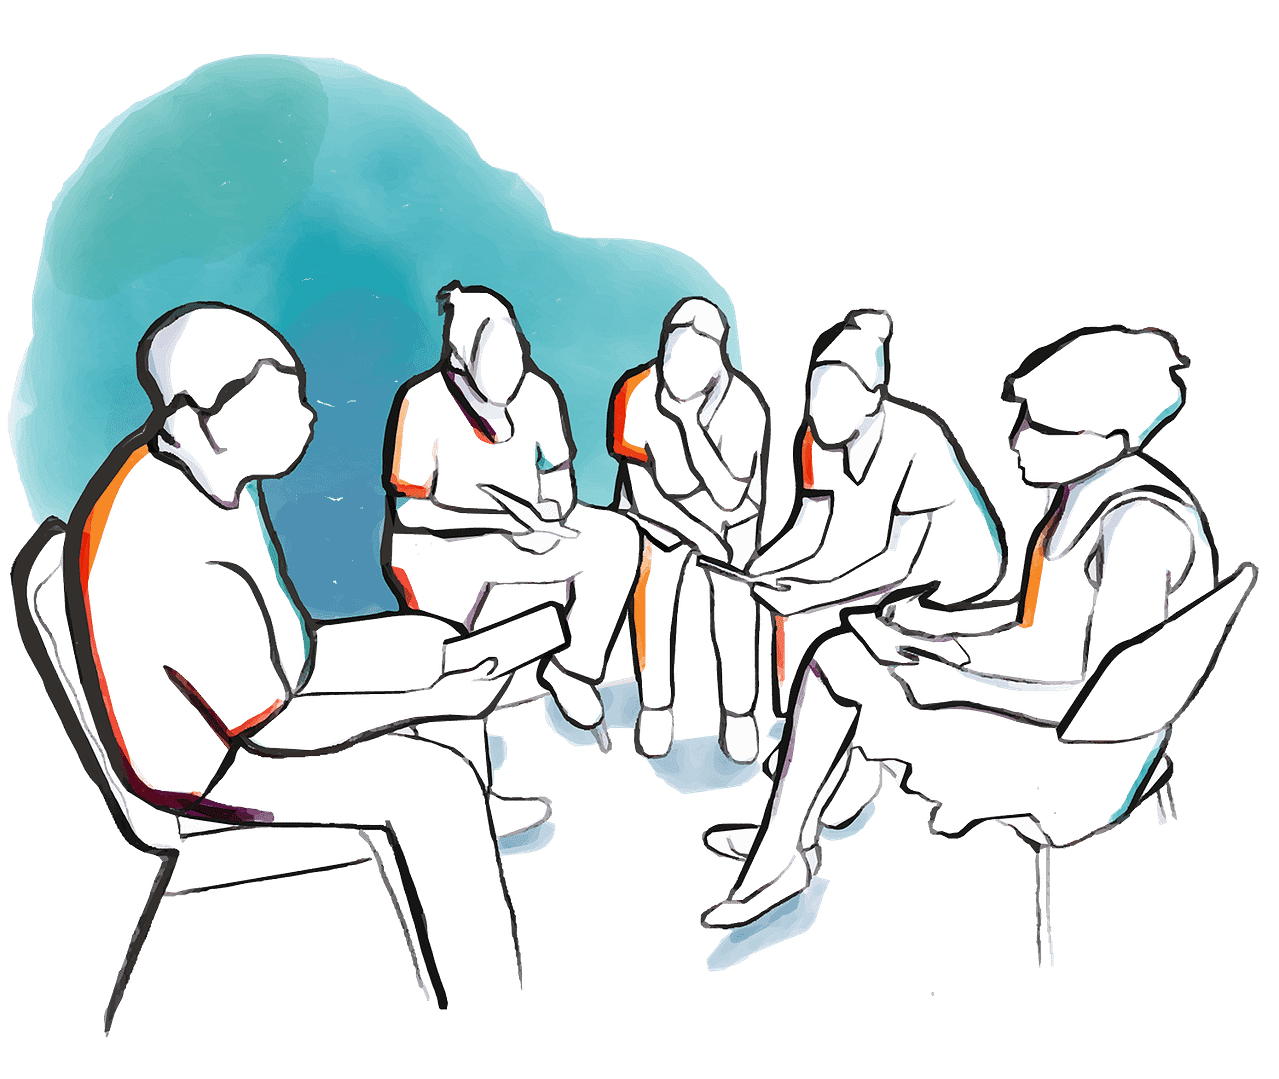 Illustration of group of people in workshop or discussion